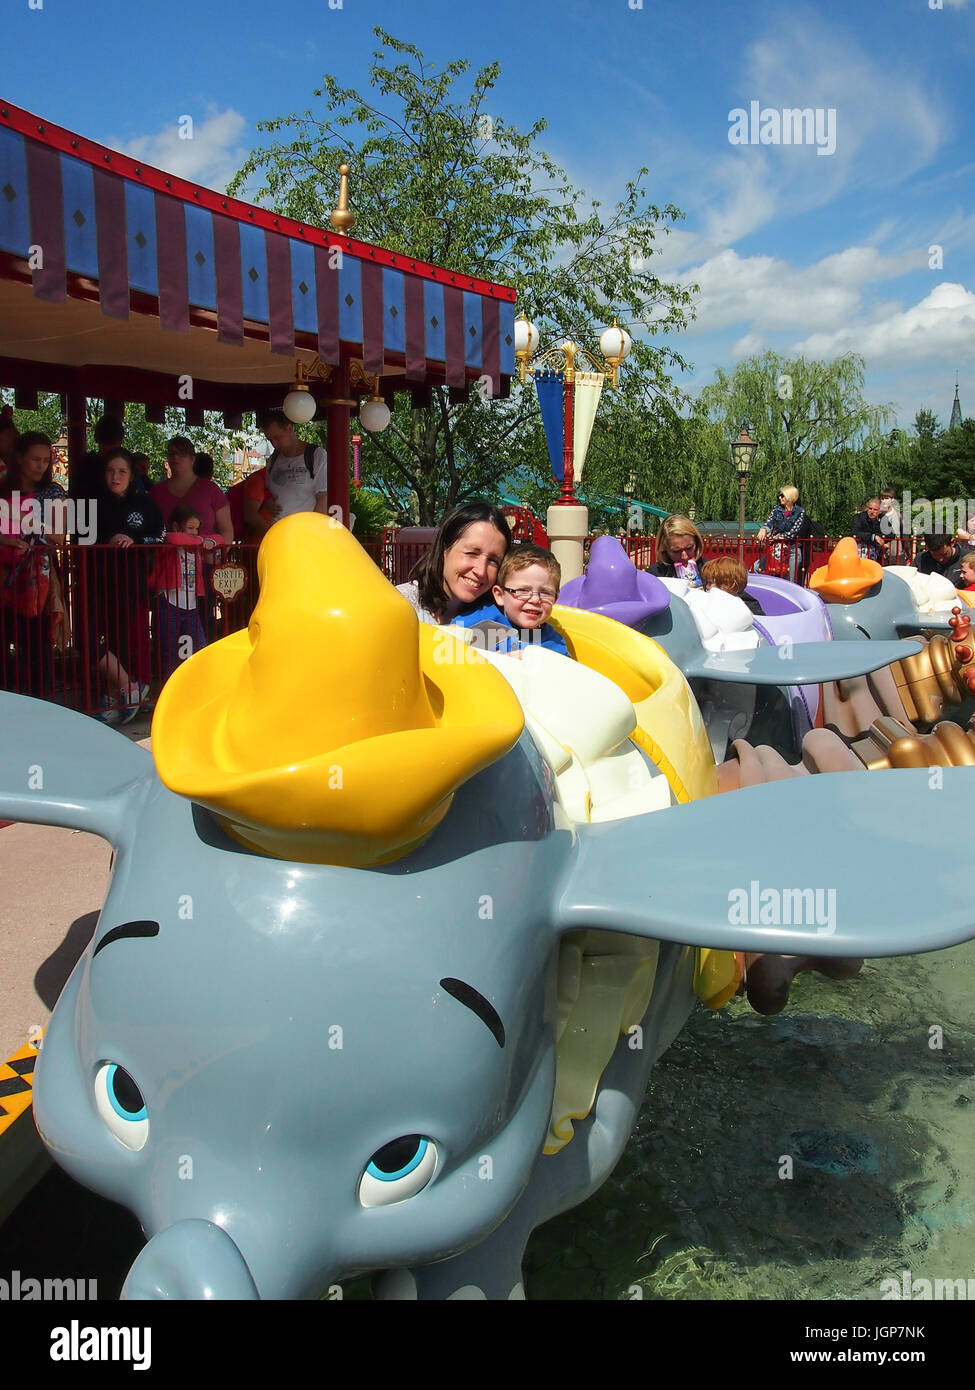 A mother and child ride the Dumbo the flying elephant ride at Disneyland Paris Stock Photo